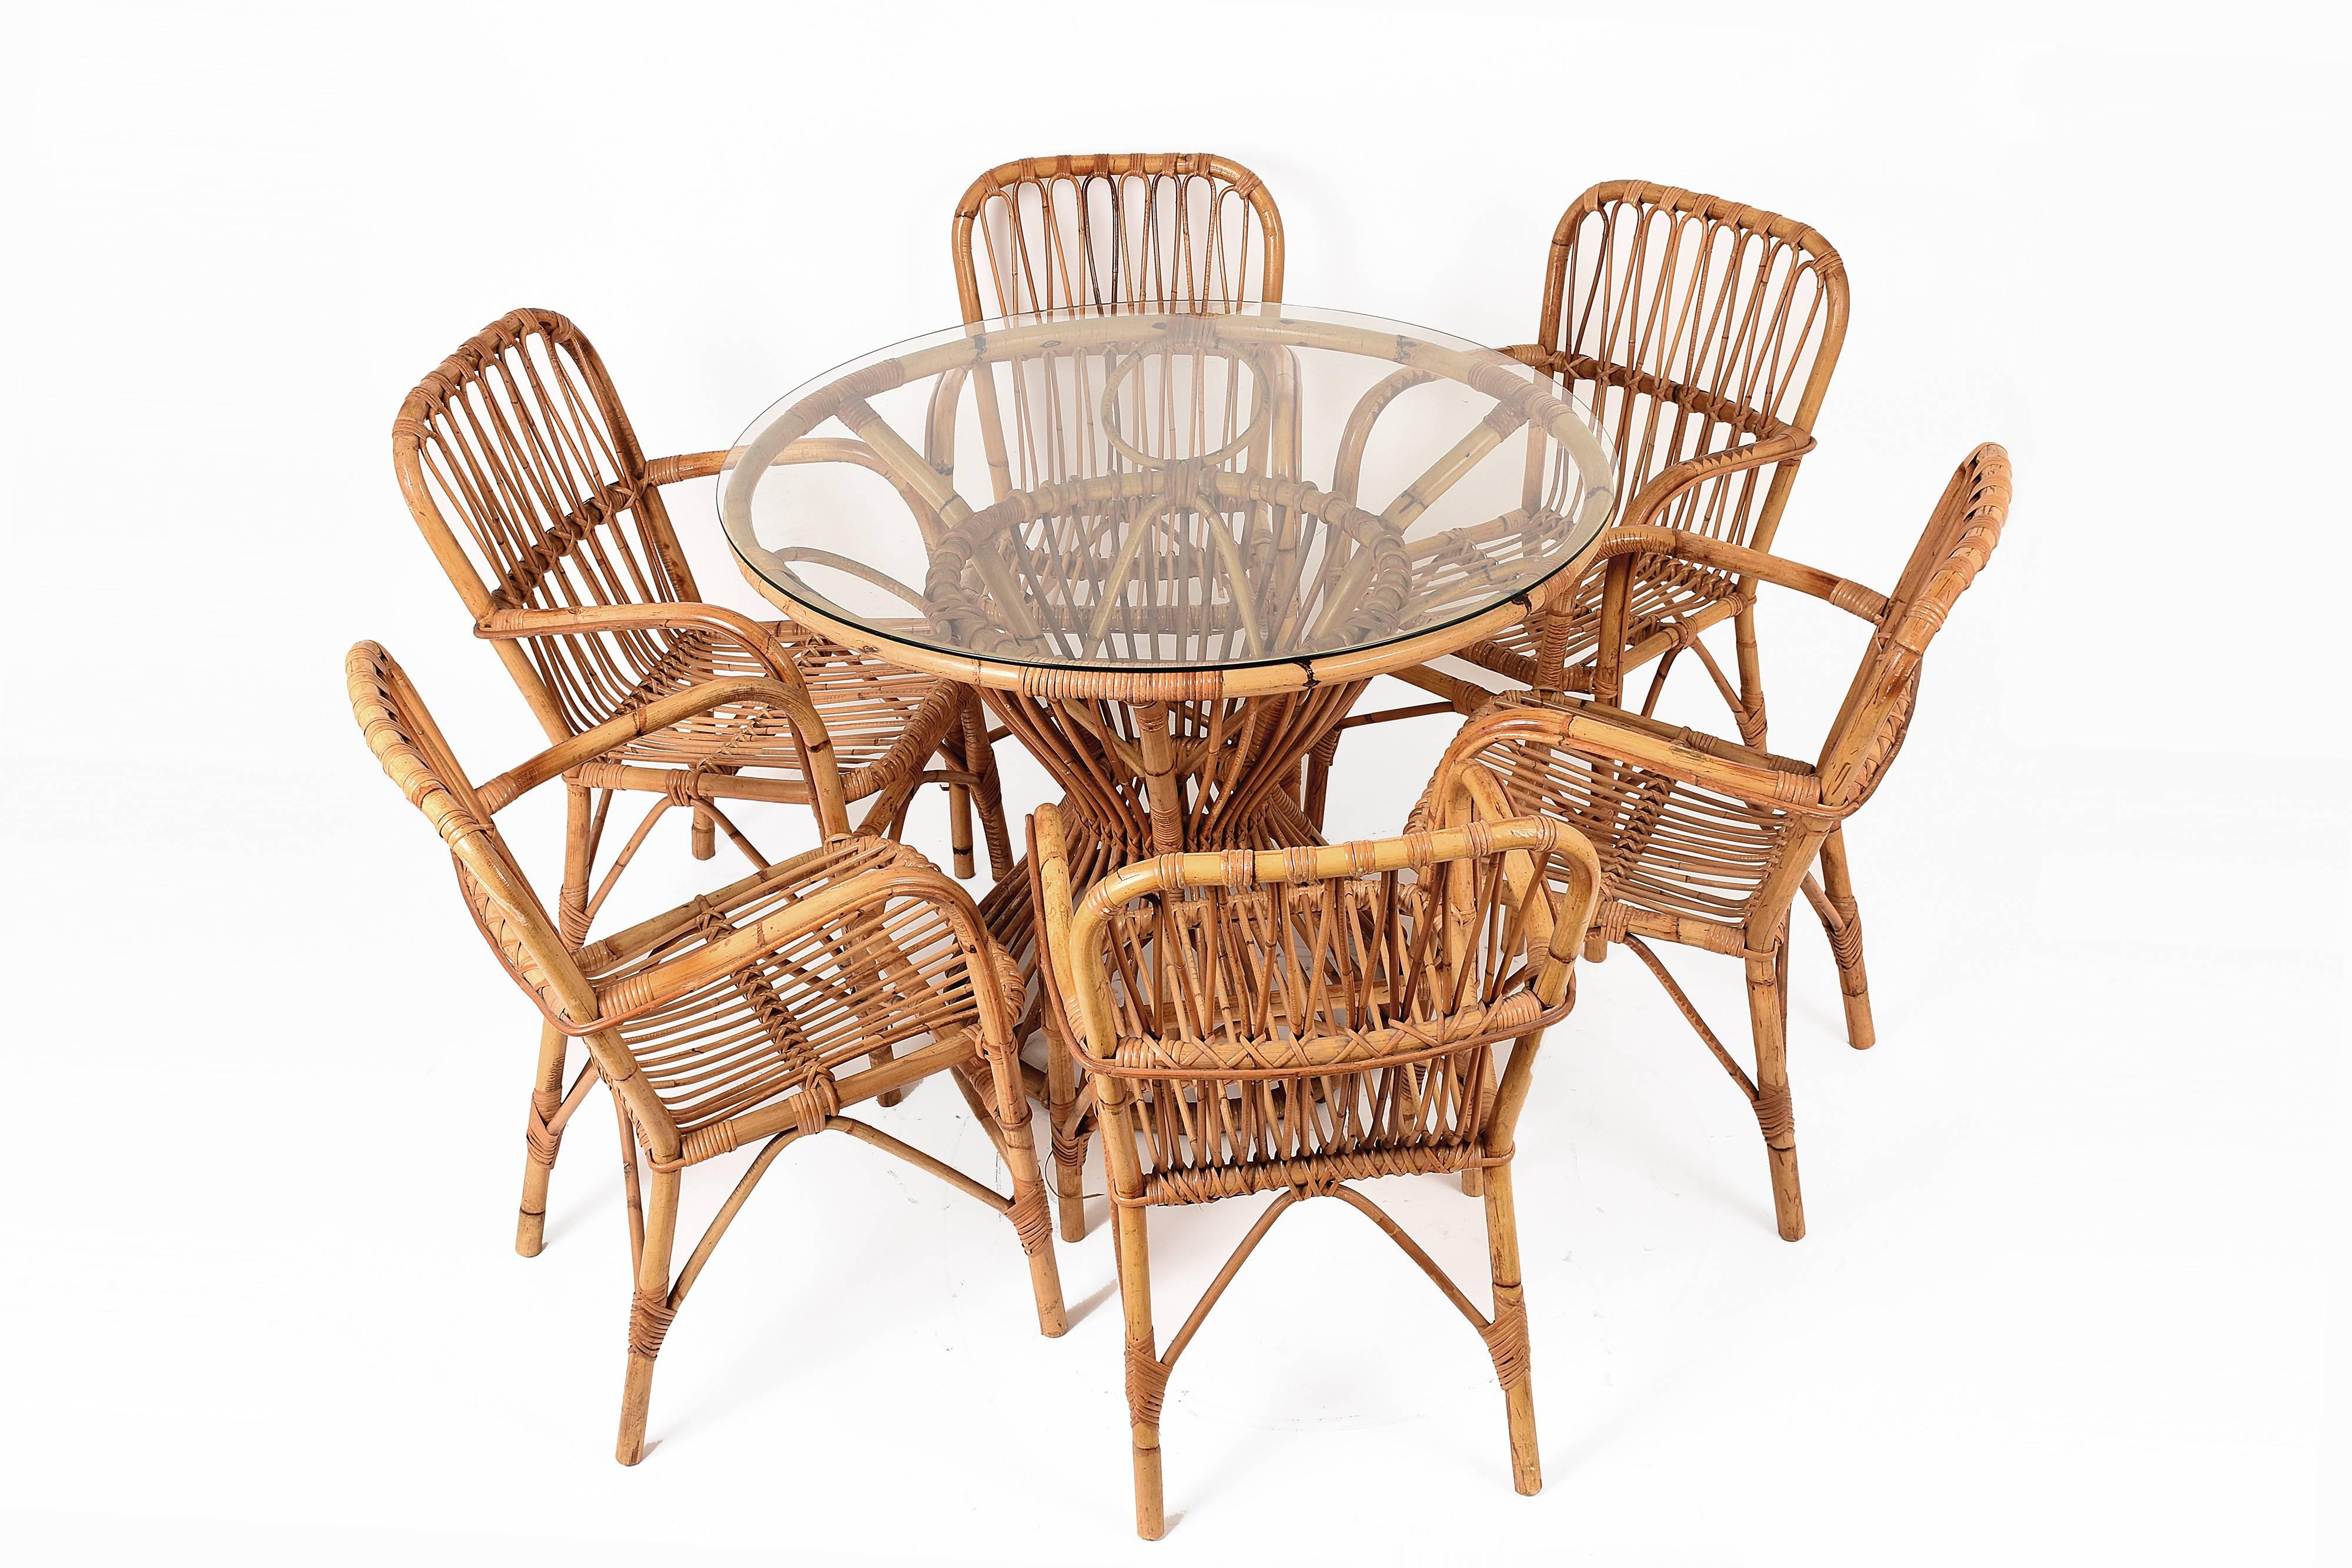 Beautiful table and six chairs attributed to Franco Albini, Italy, 1960s.
Excellent state of conservation.
Table measures: 45.68 x 30.70 in.
Chairs measures: 22.8 x 19.7 x 33.8 in.